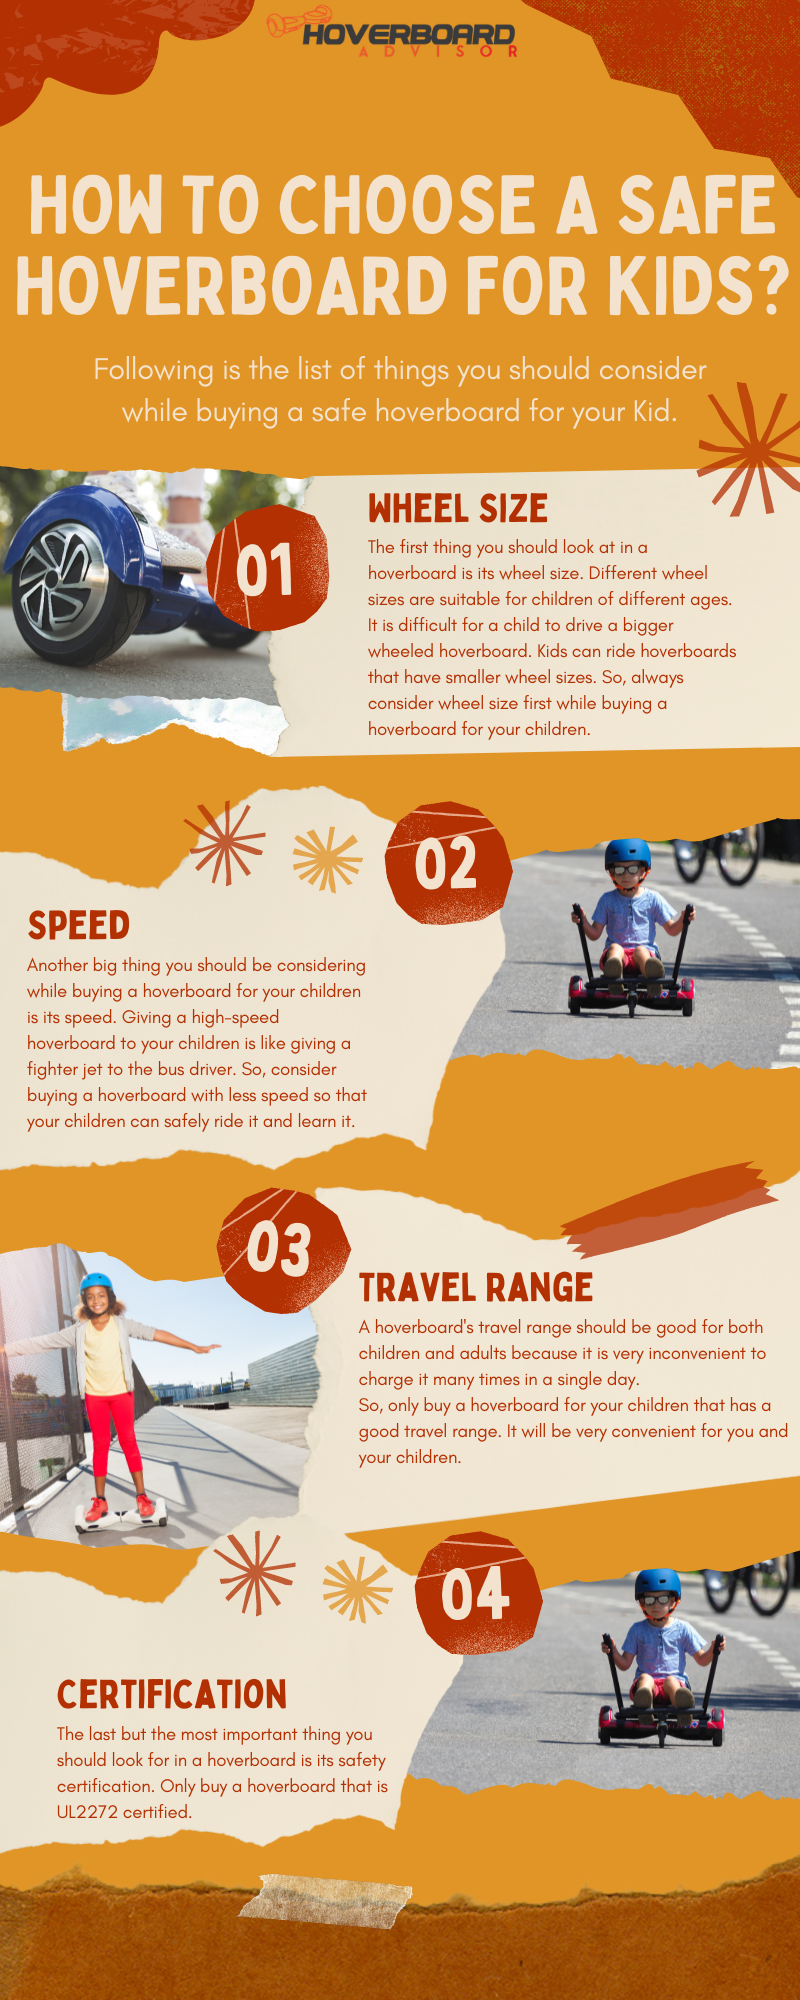 How to Choose a Safe Hoverboard for Kids